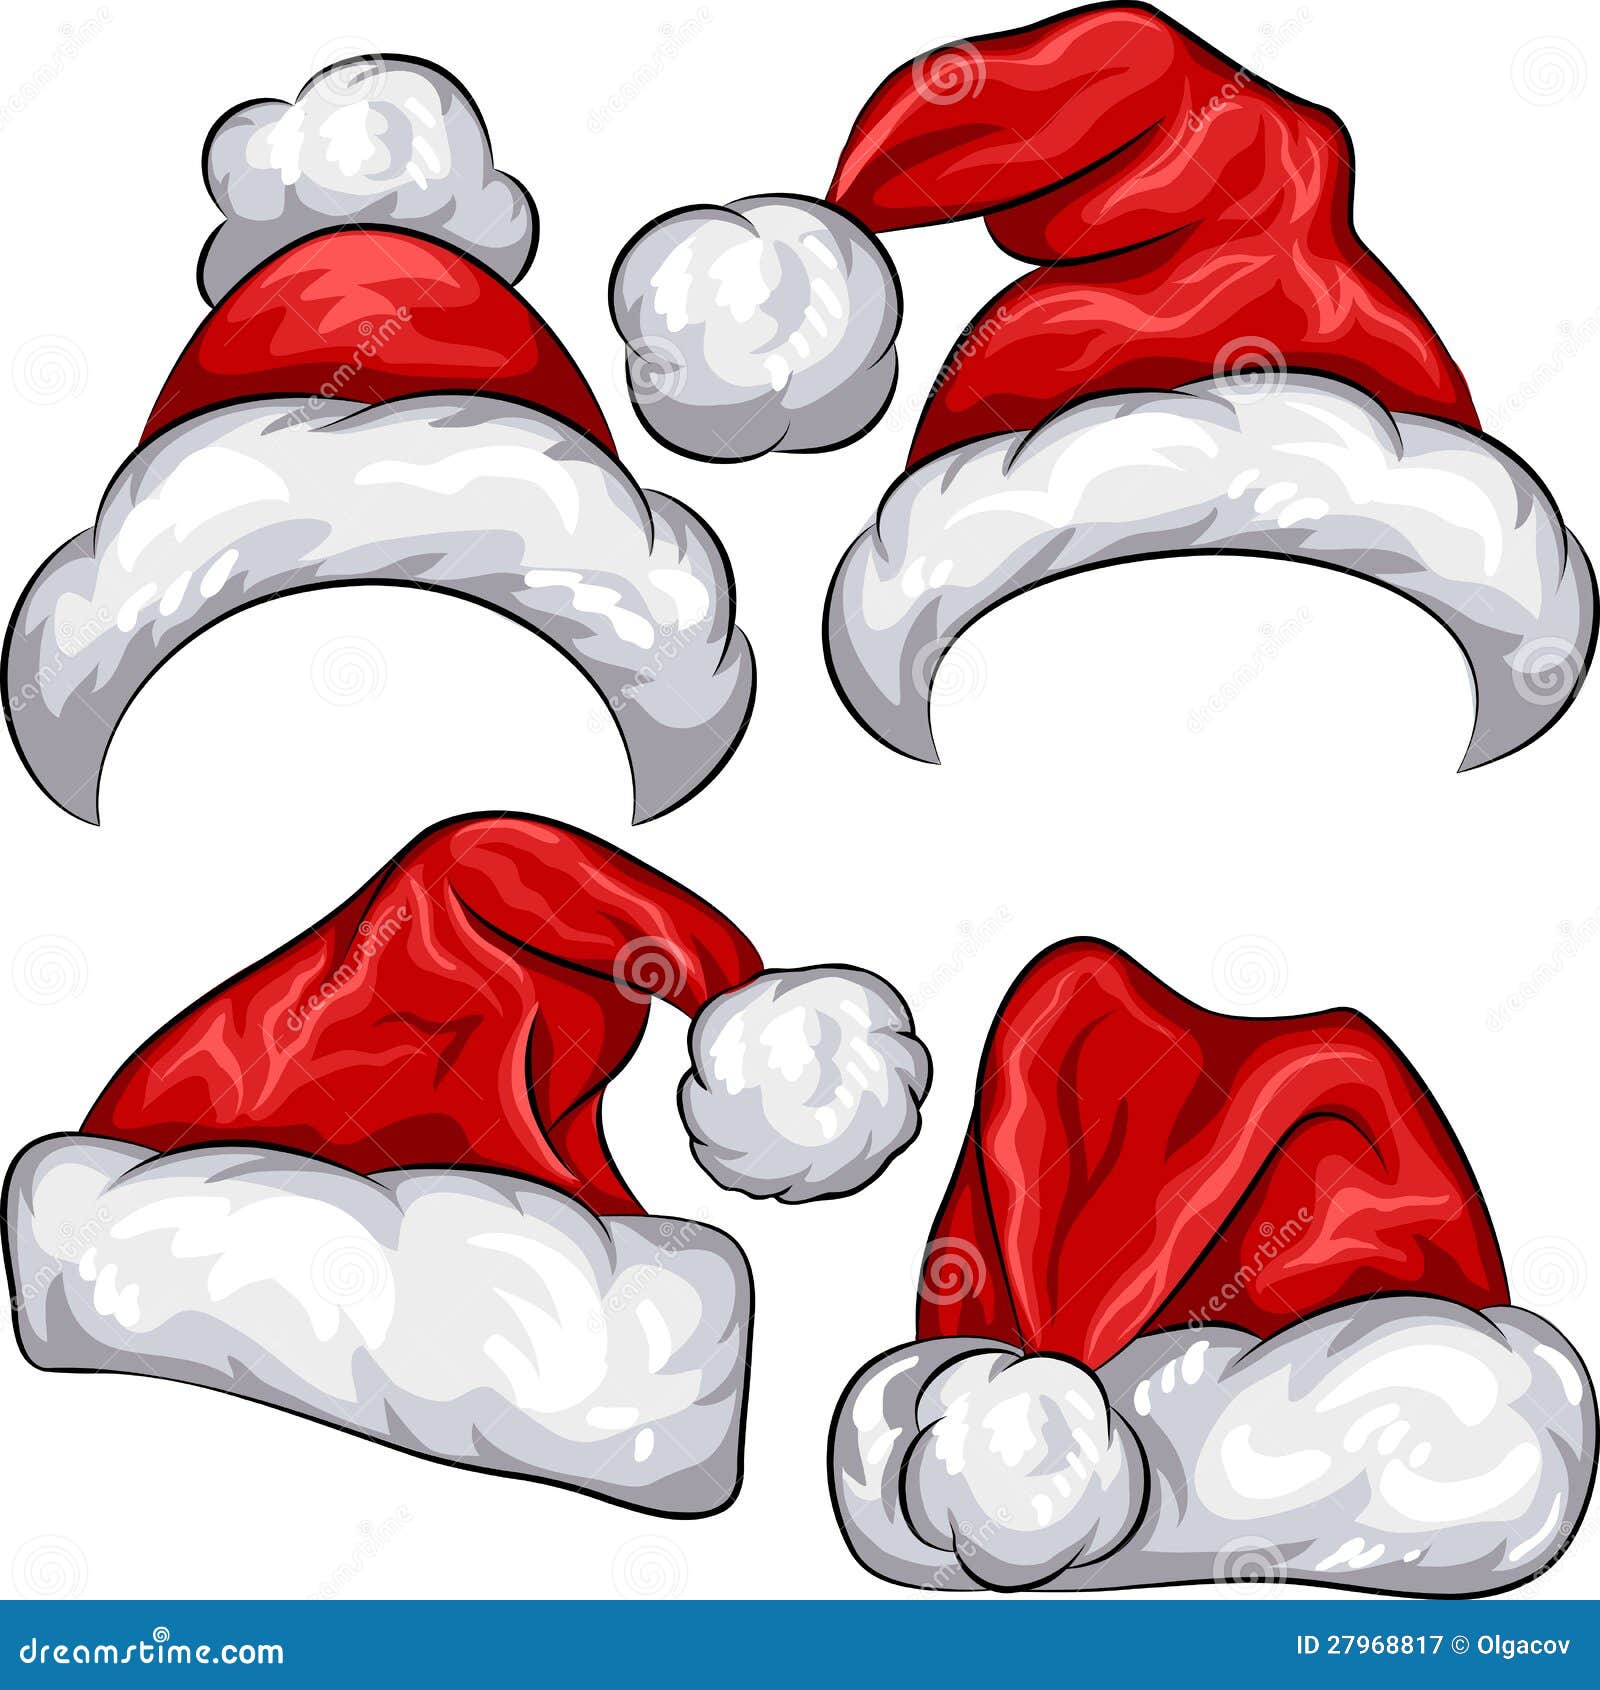 280,742 Cartoon Santa Hat Royalty-Free Photos and Stock Images |  Shutterstock